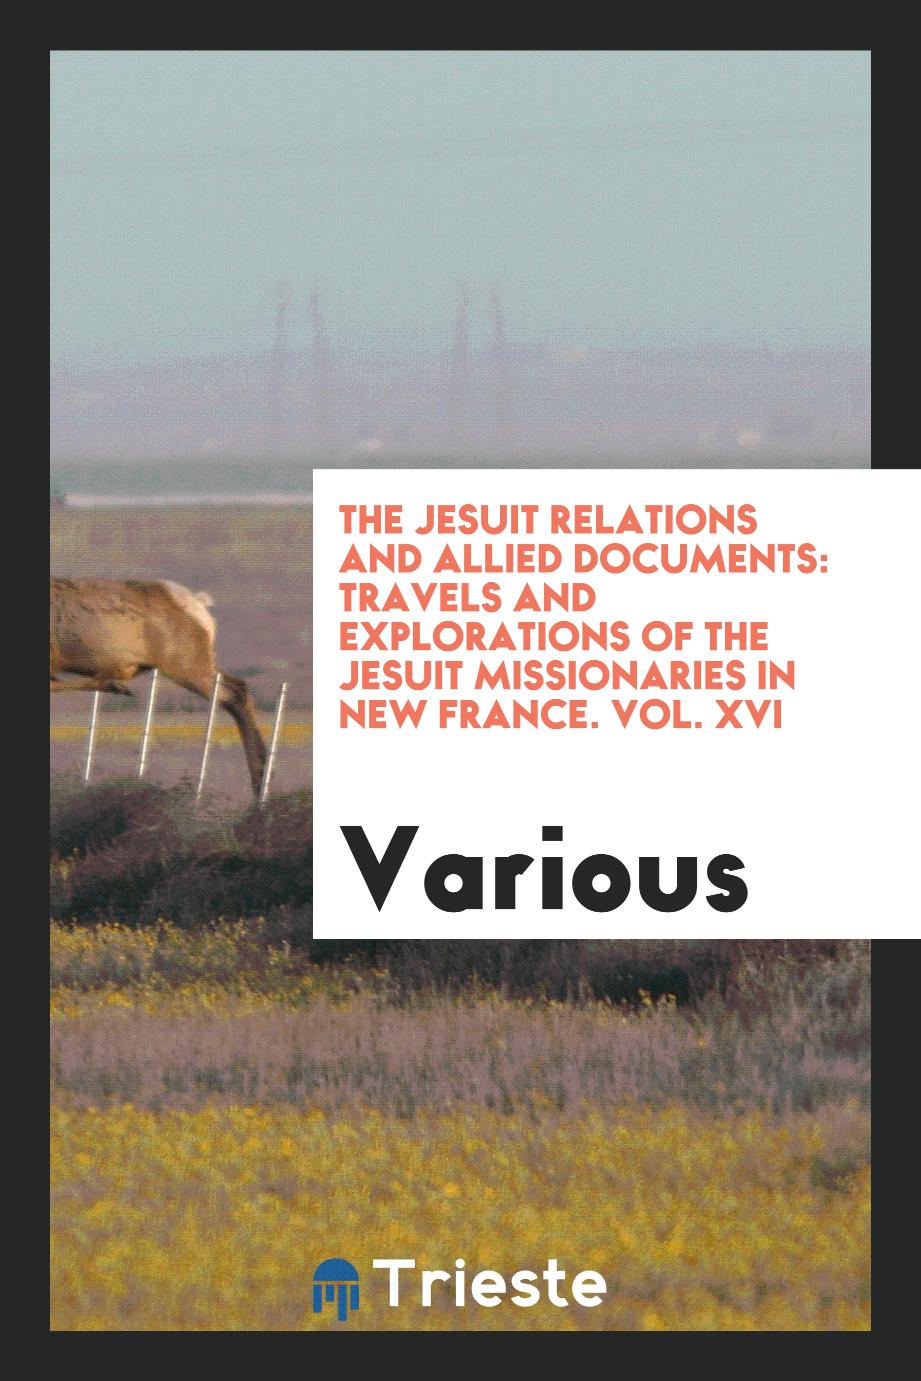 The Jesuit relations and allied documents: travels and explorations of the Jesuit missionaries in New France. Vol. XVI